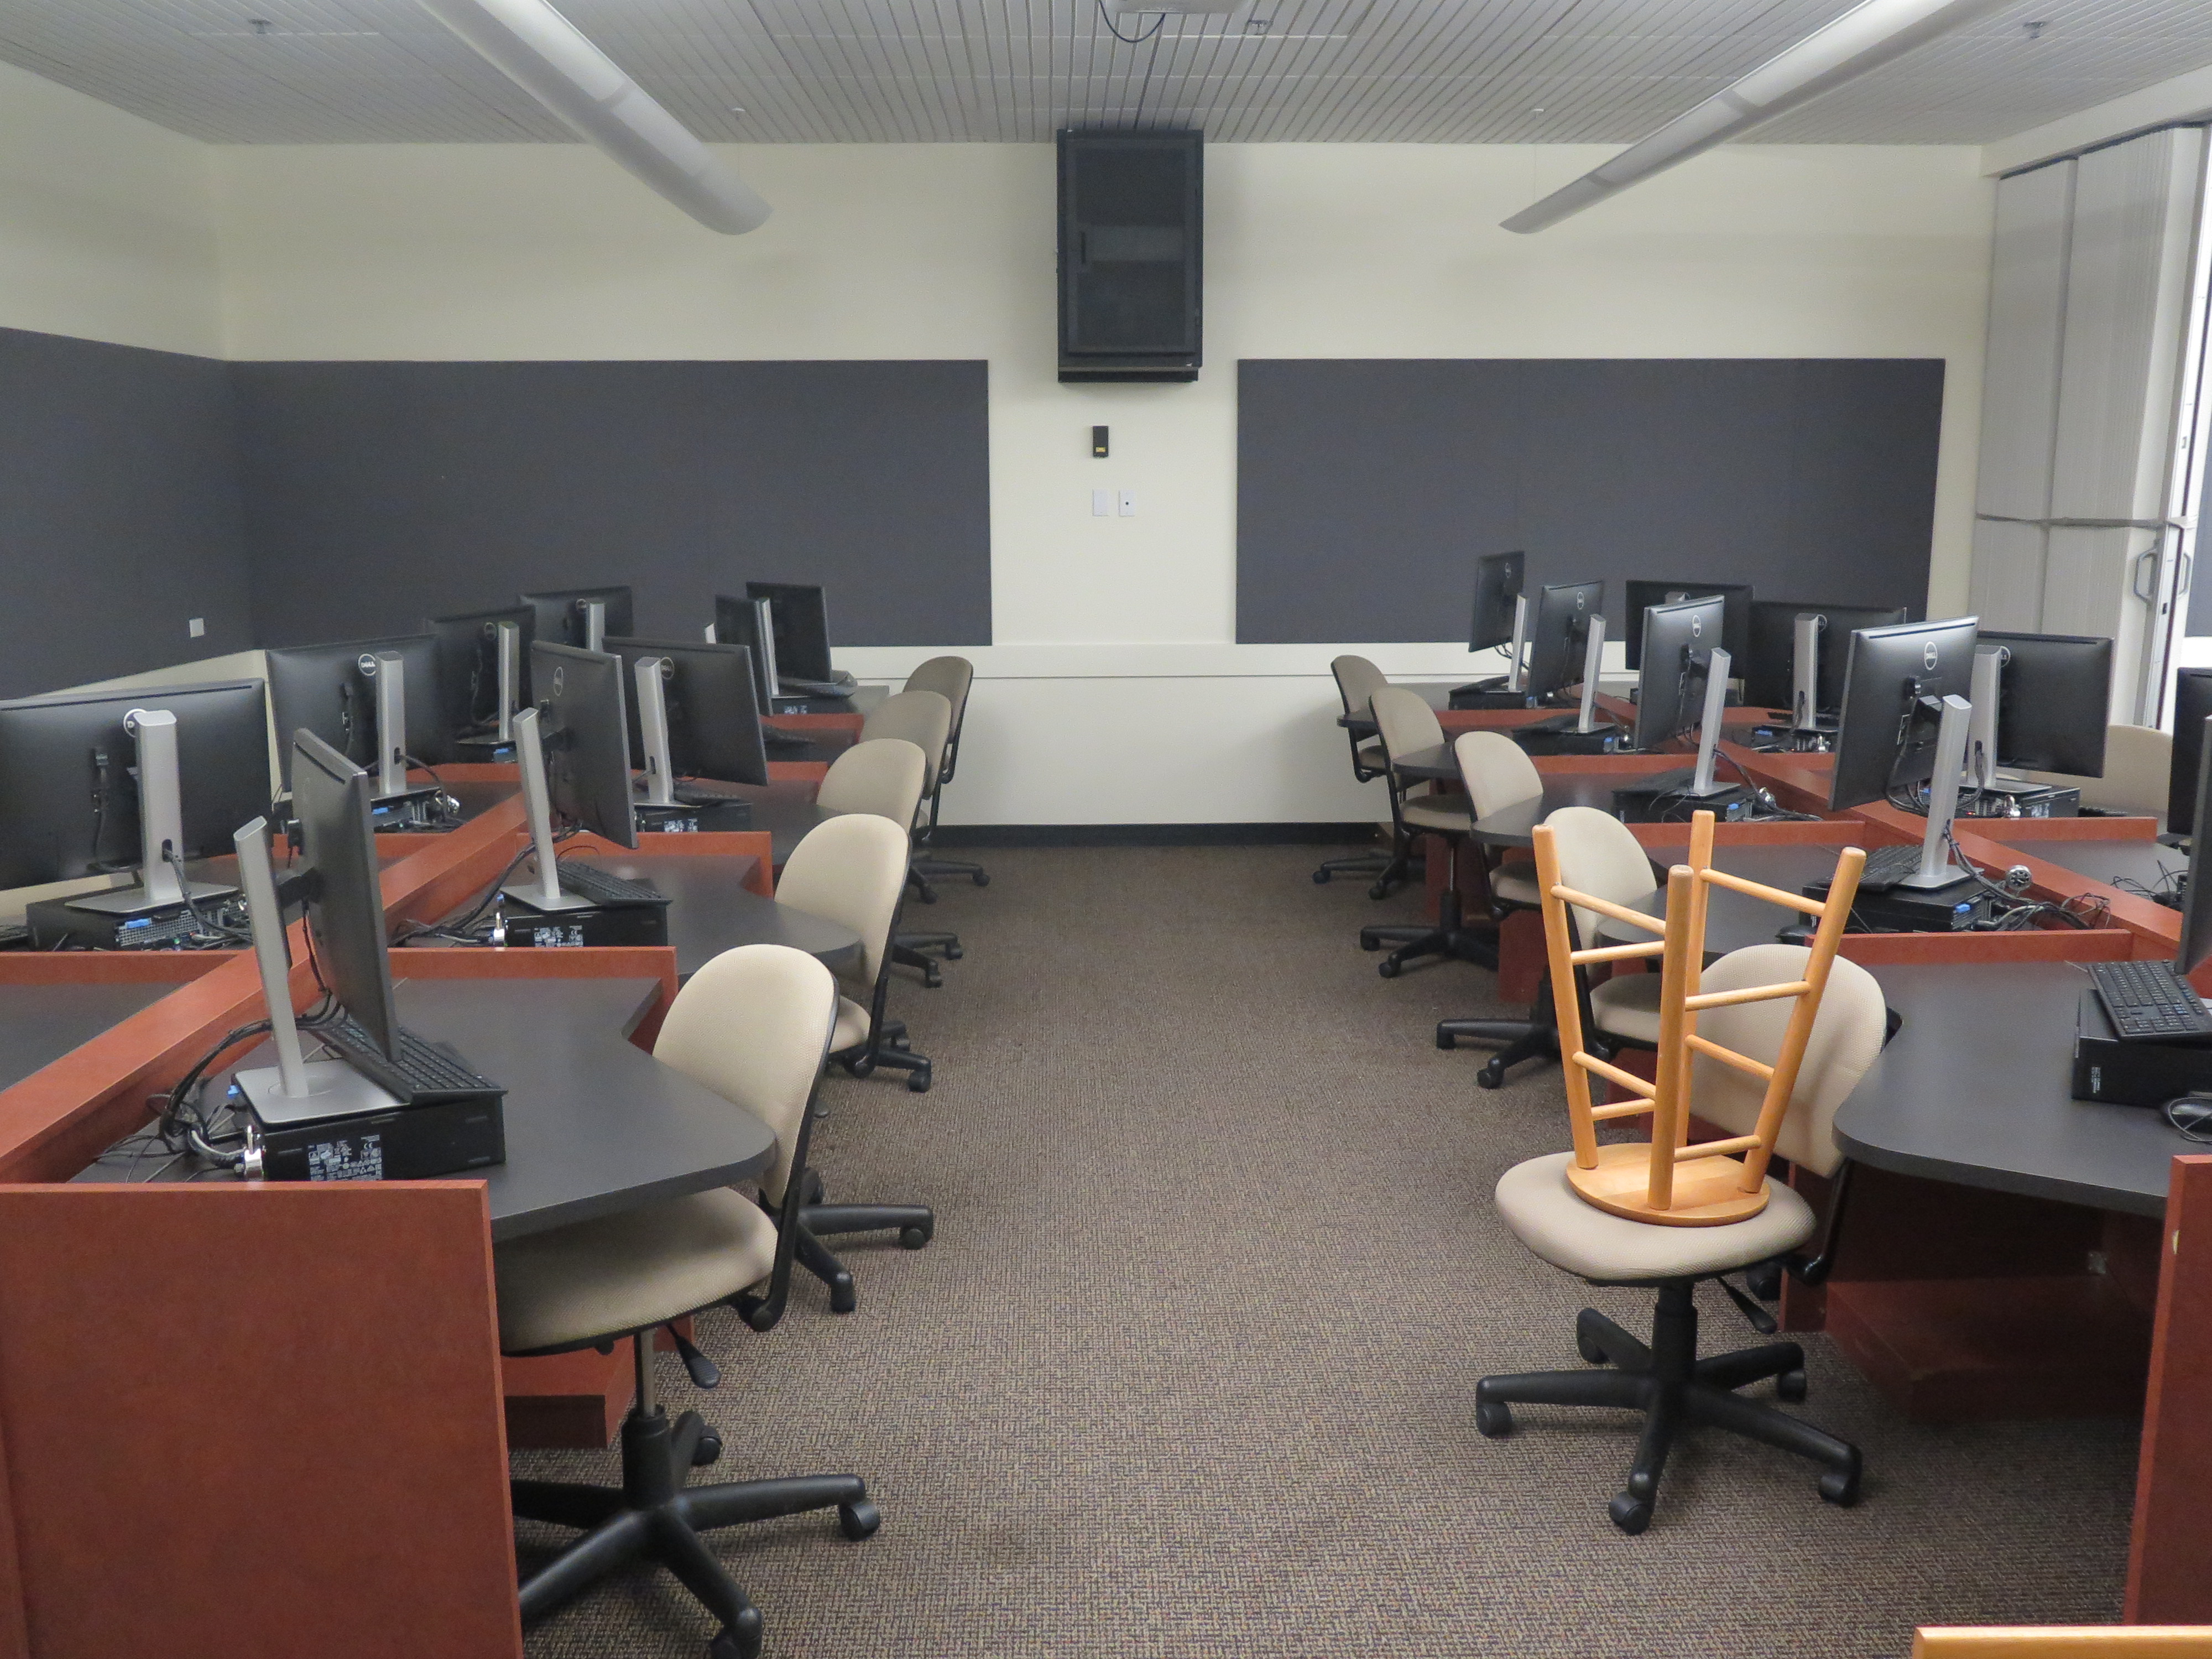 Computer Lab consists of carpet floor, individual computer stations in a row with an aisle in between each row, and Podium and whiteboard located at the front of the room. 